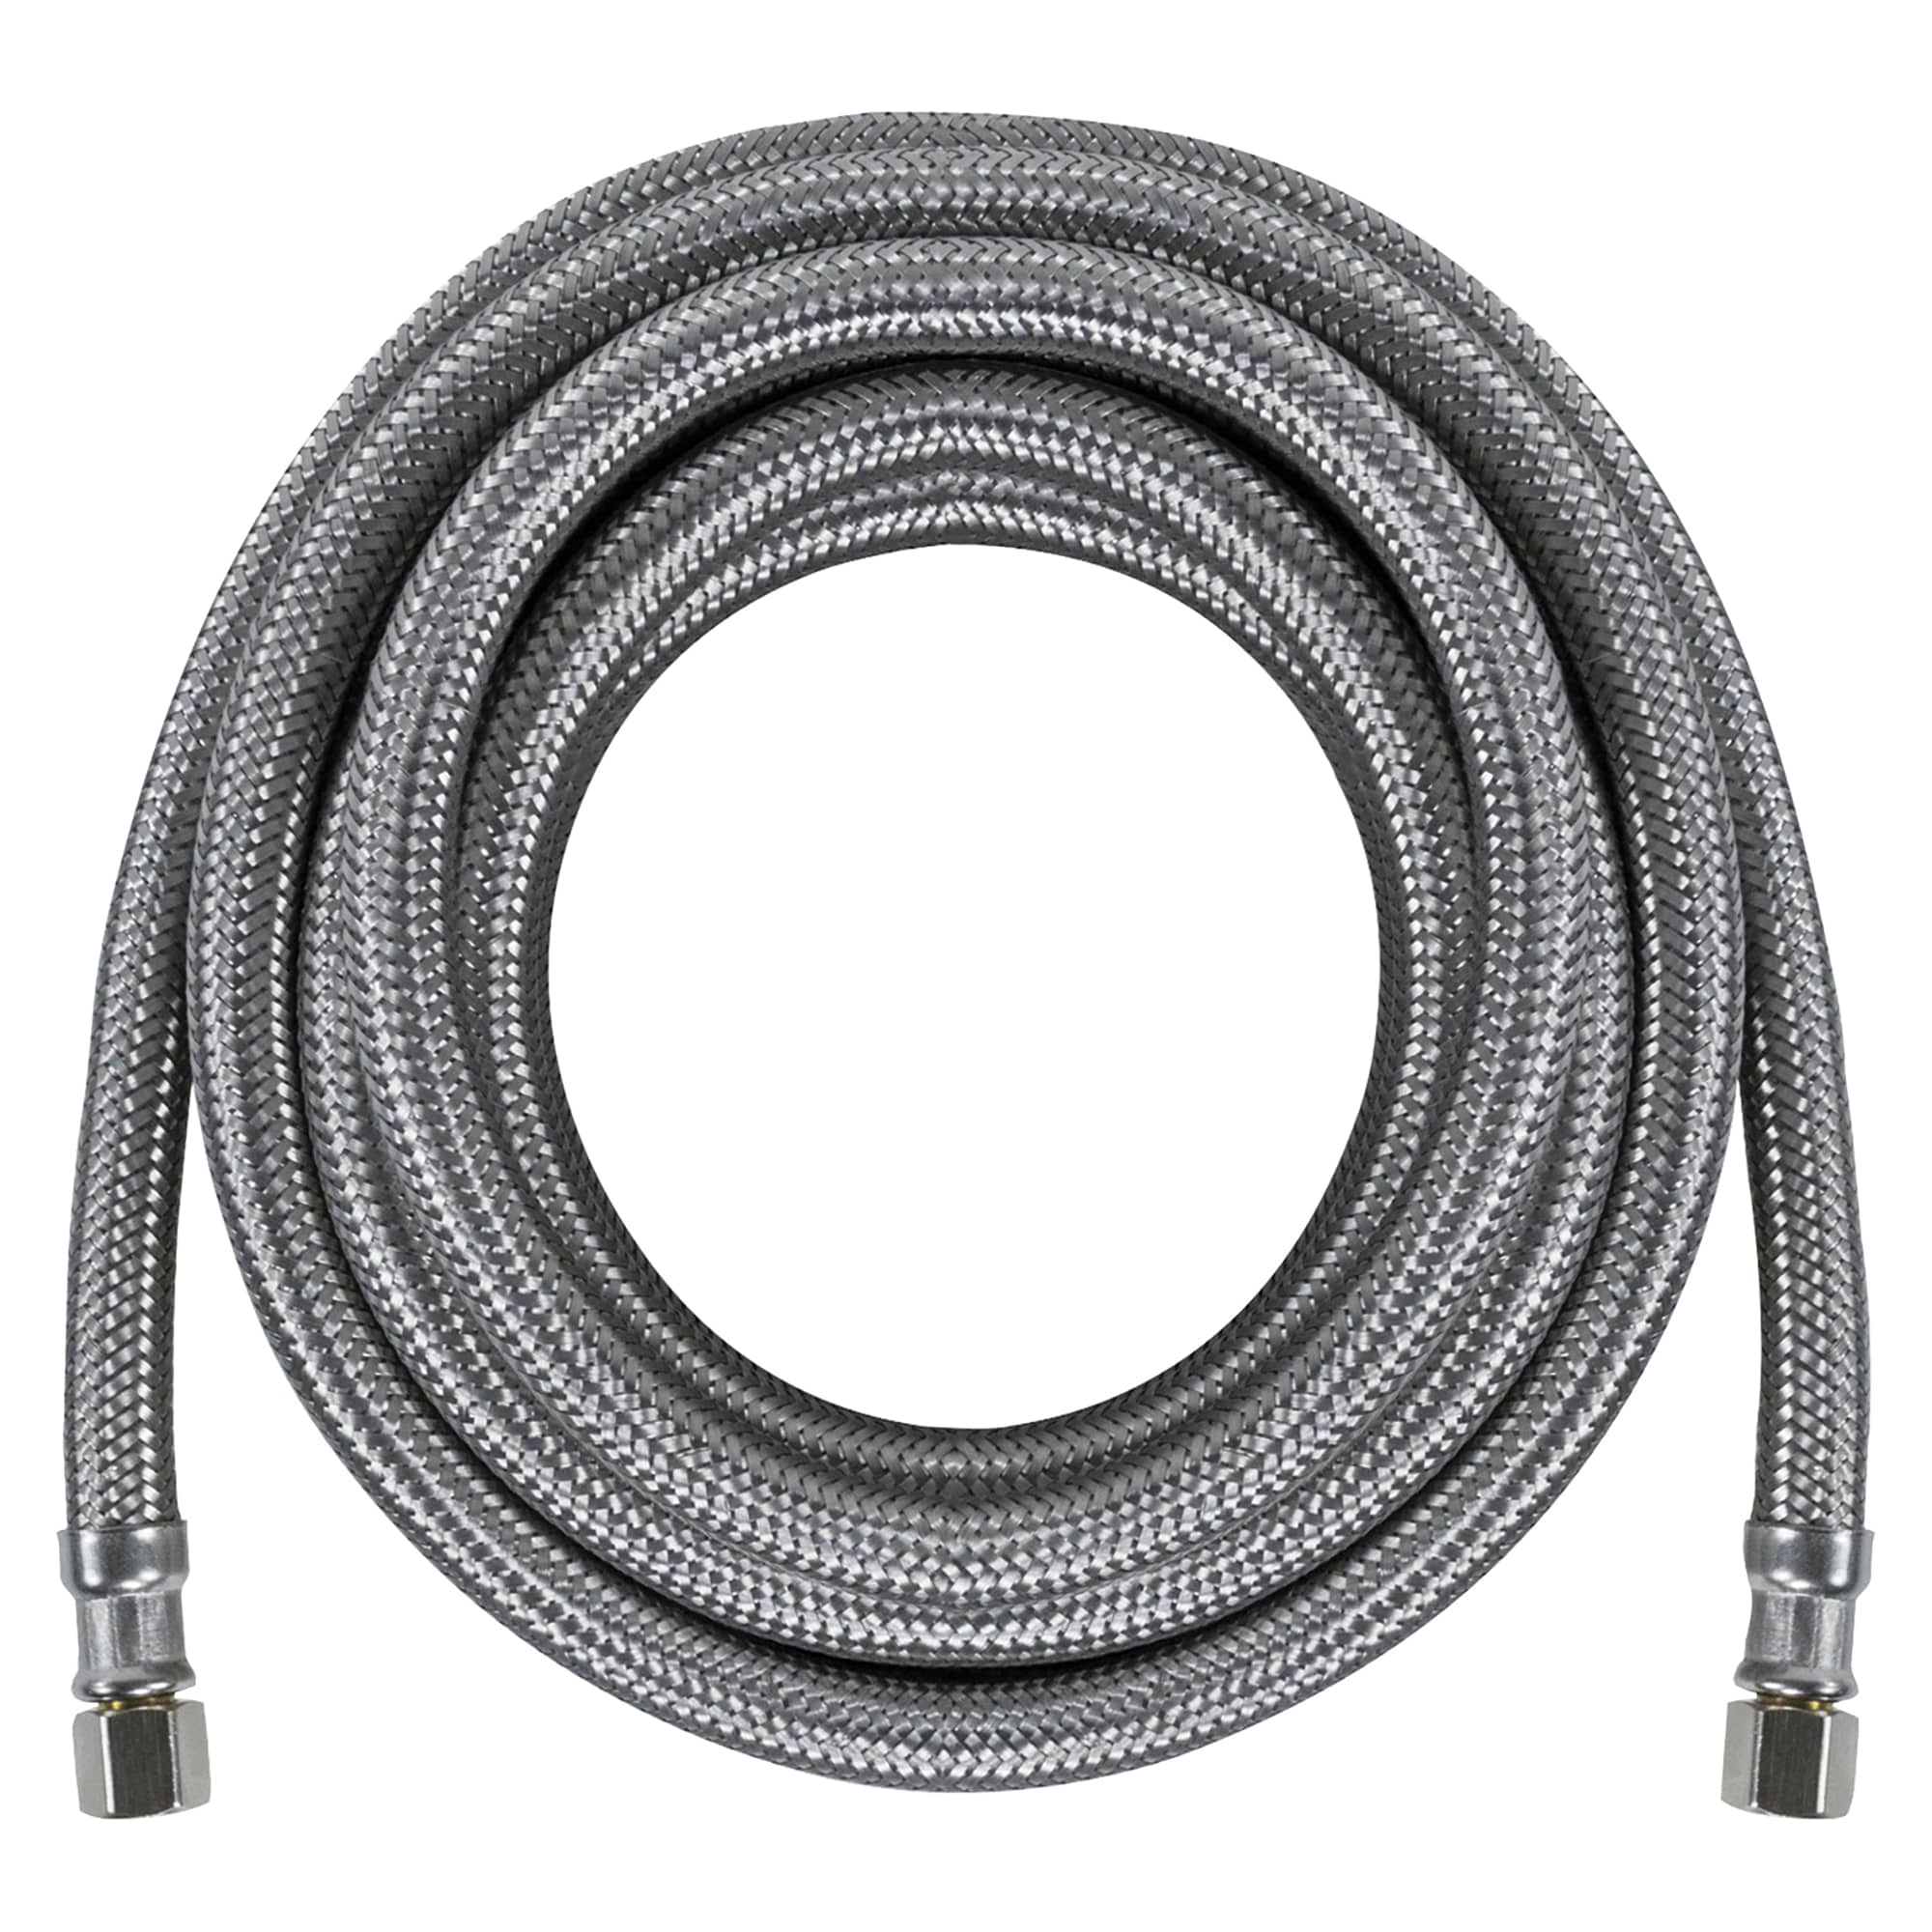 Accessories ICEMAKERLINE Refrigerator Stainless Steel Braided Water Line  Connector, Simon's Furniture